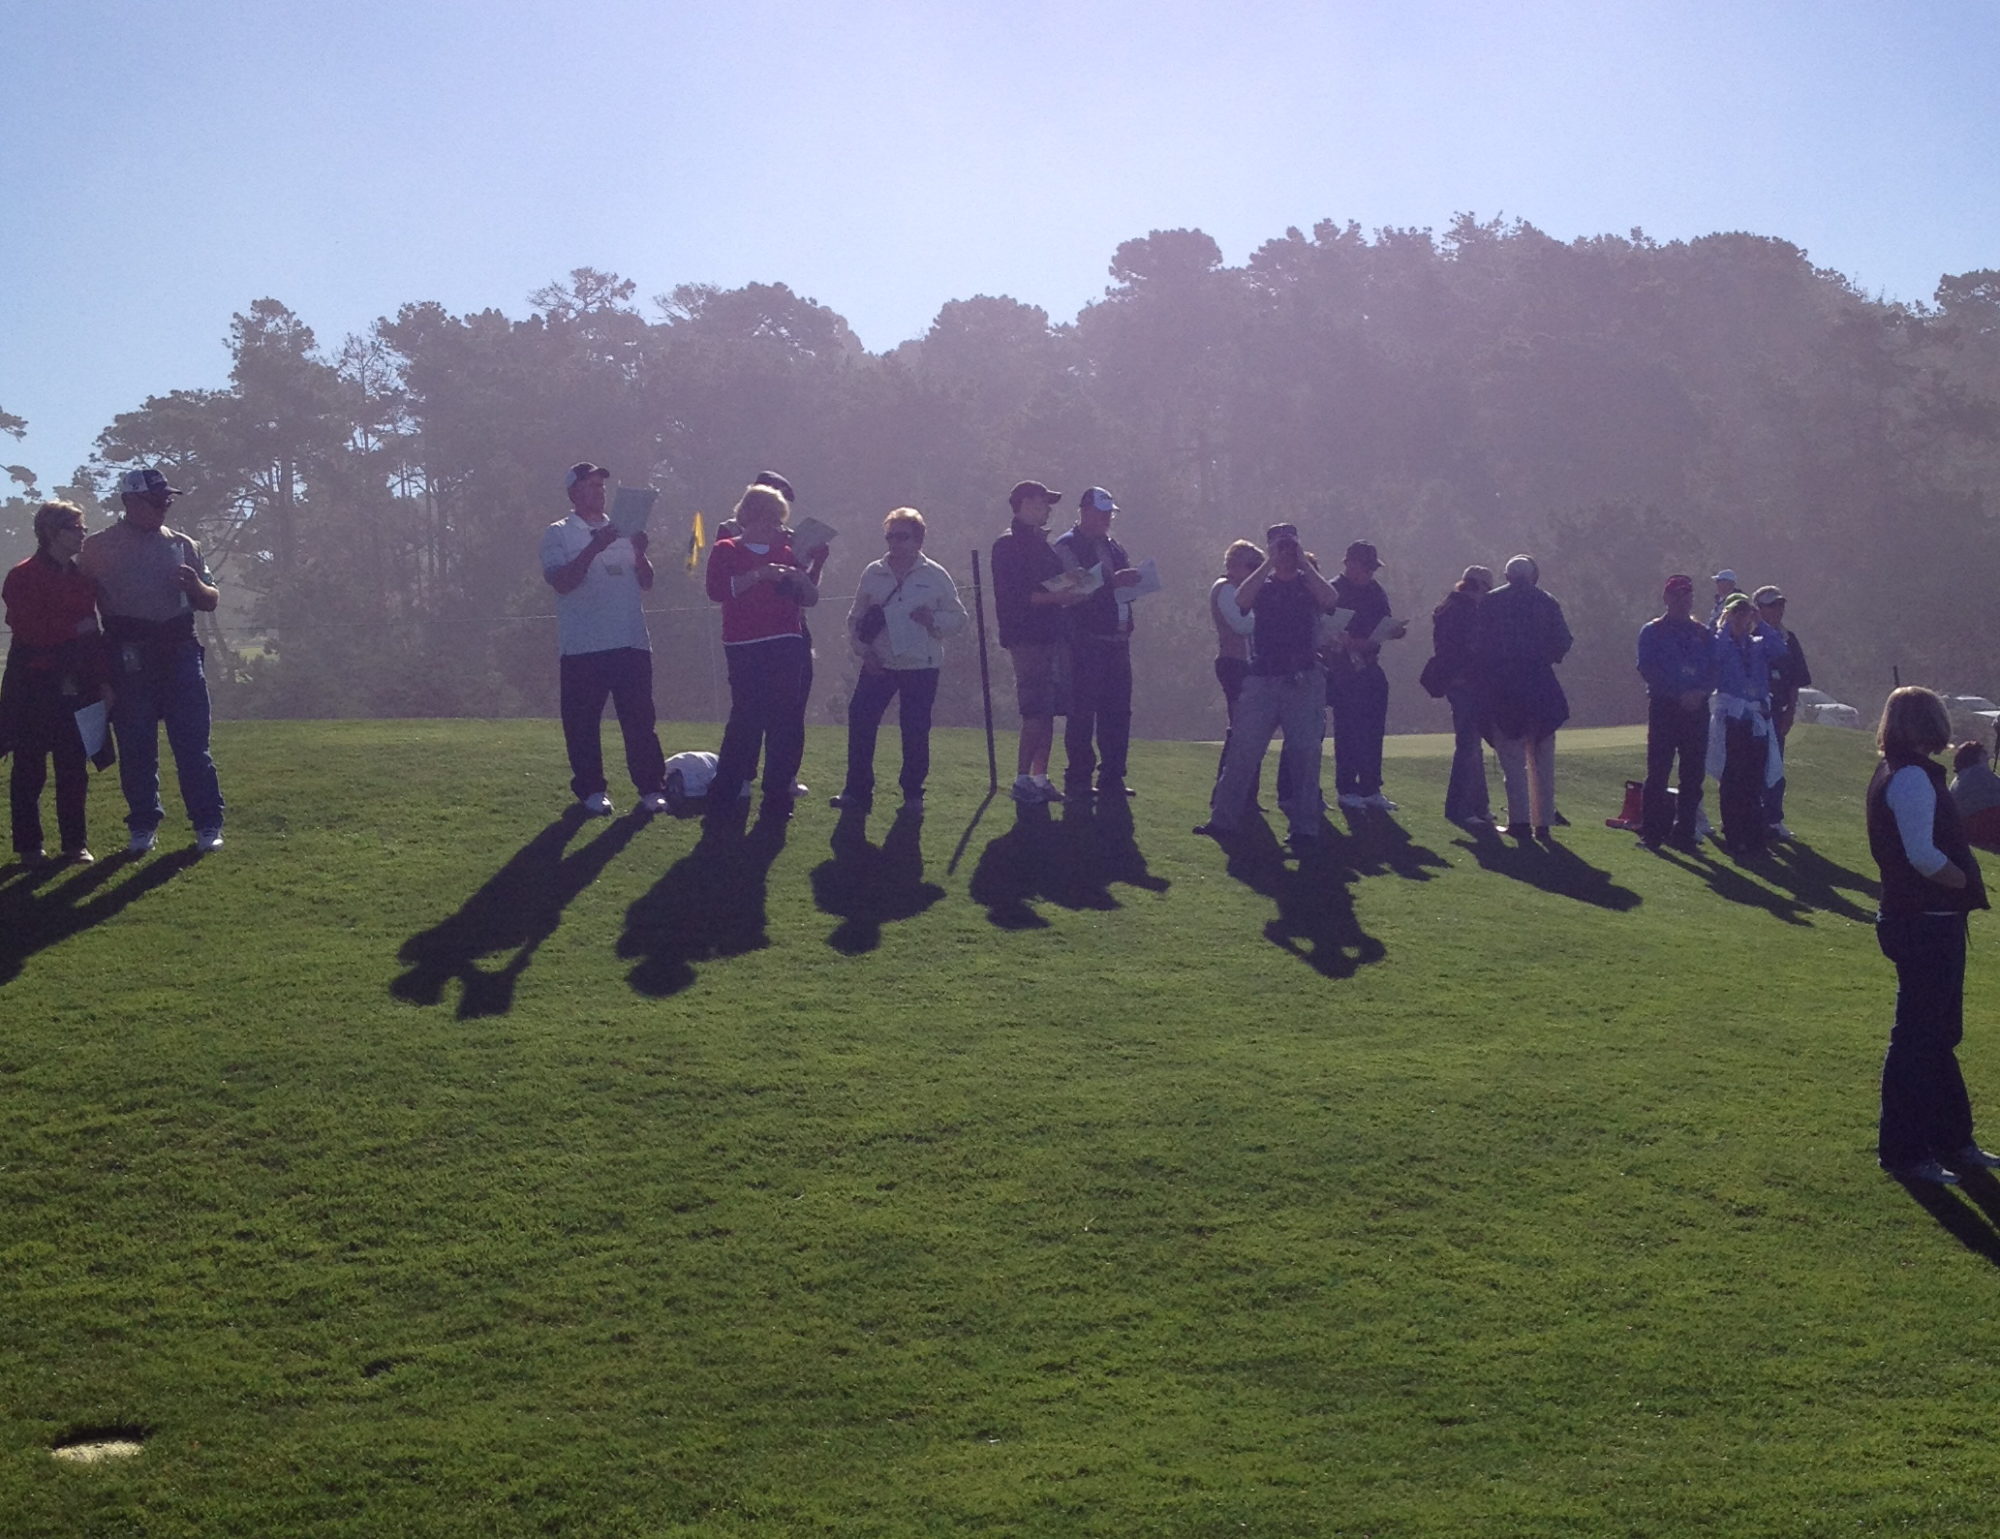 Fans watching the PGA Pro Am at Spyglass